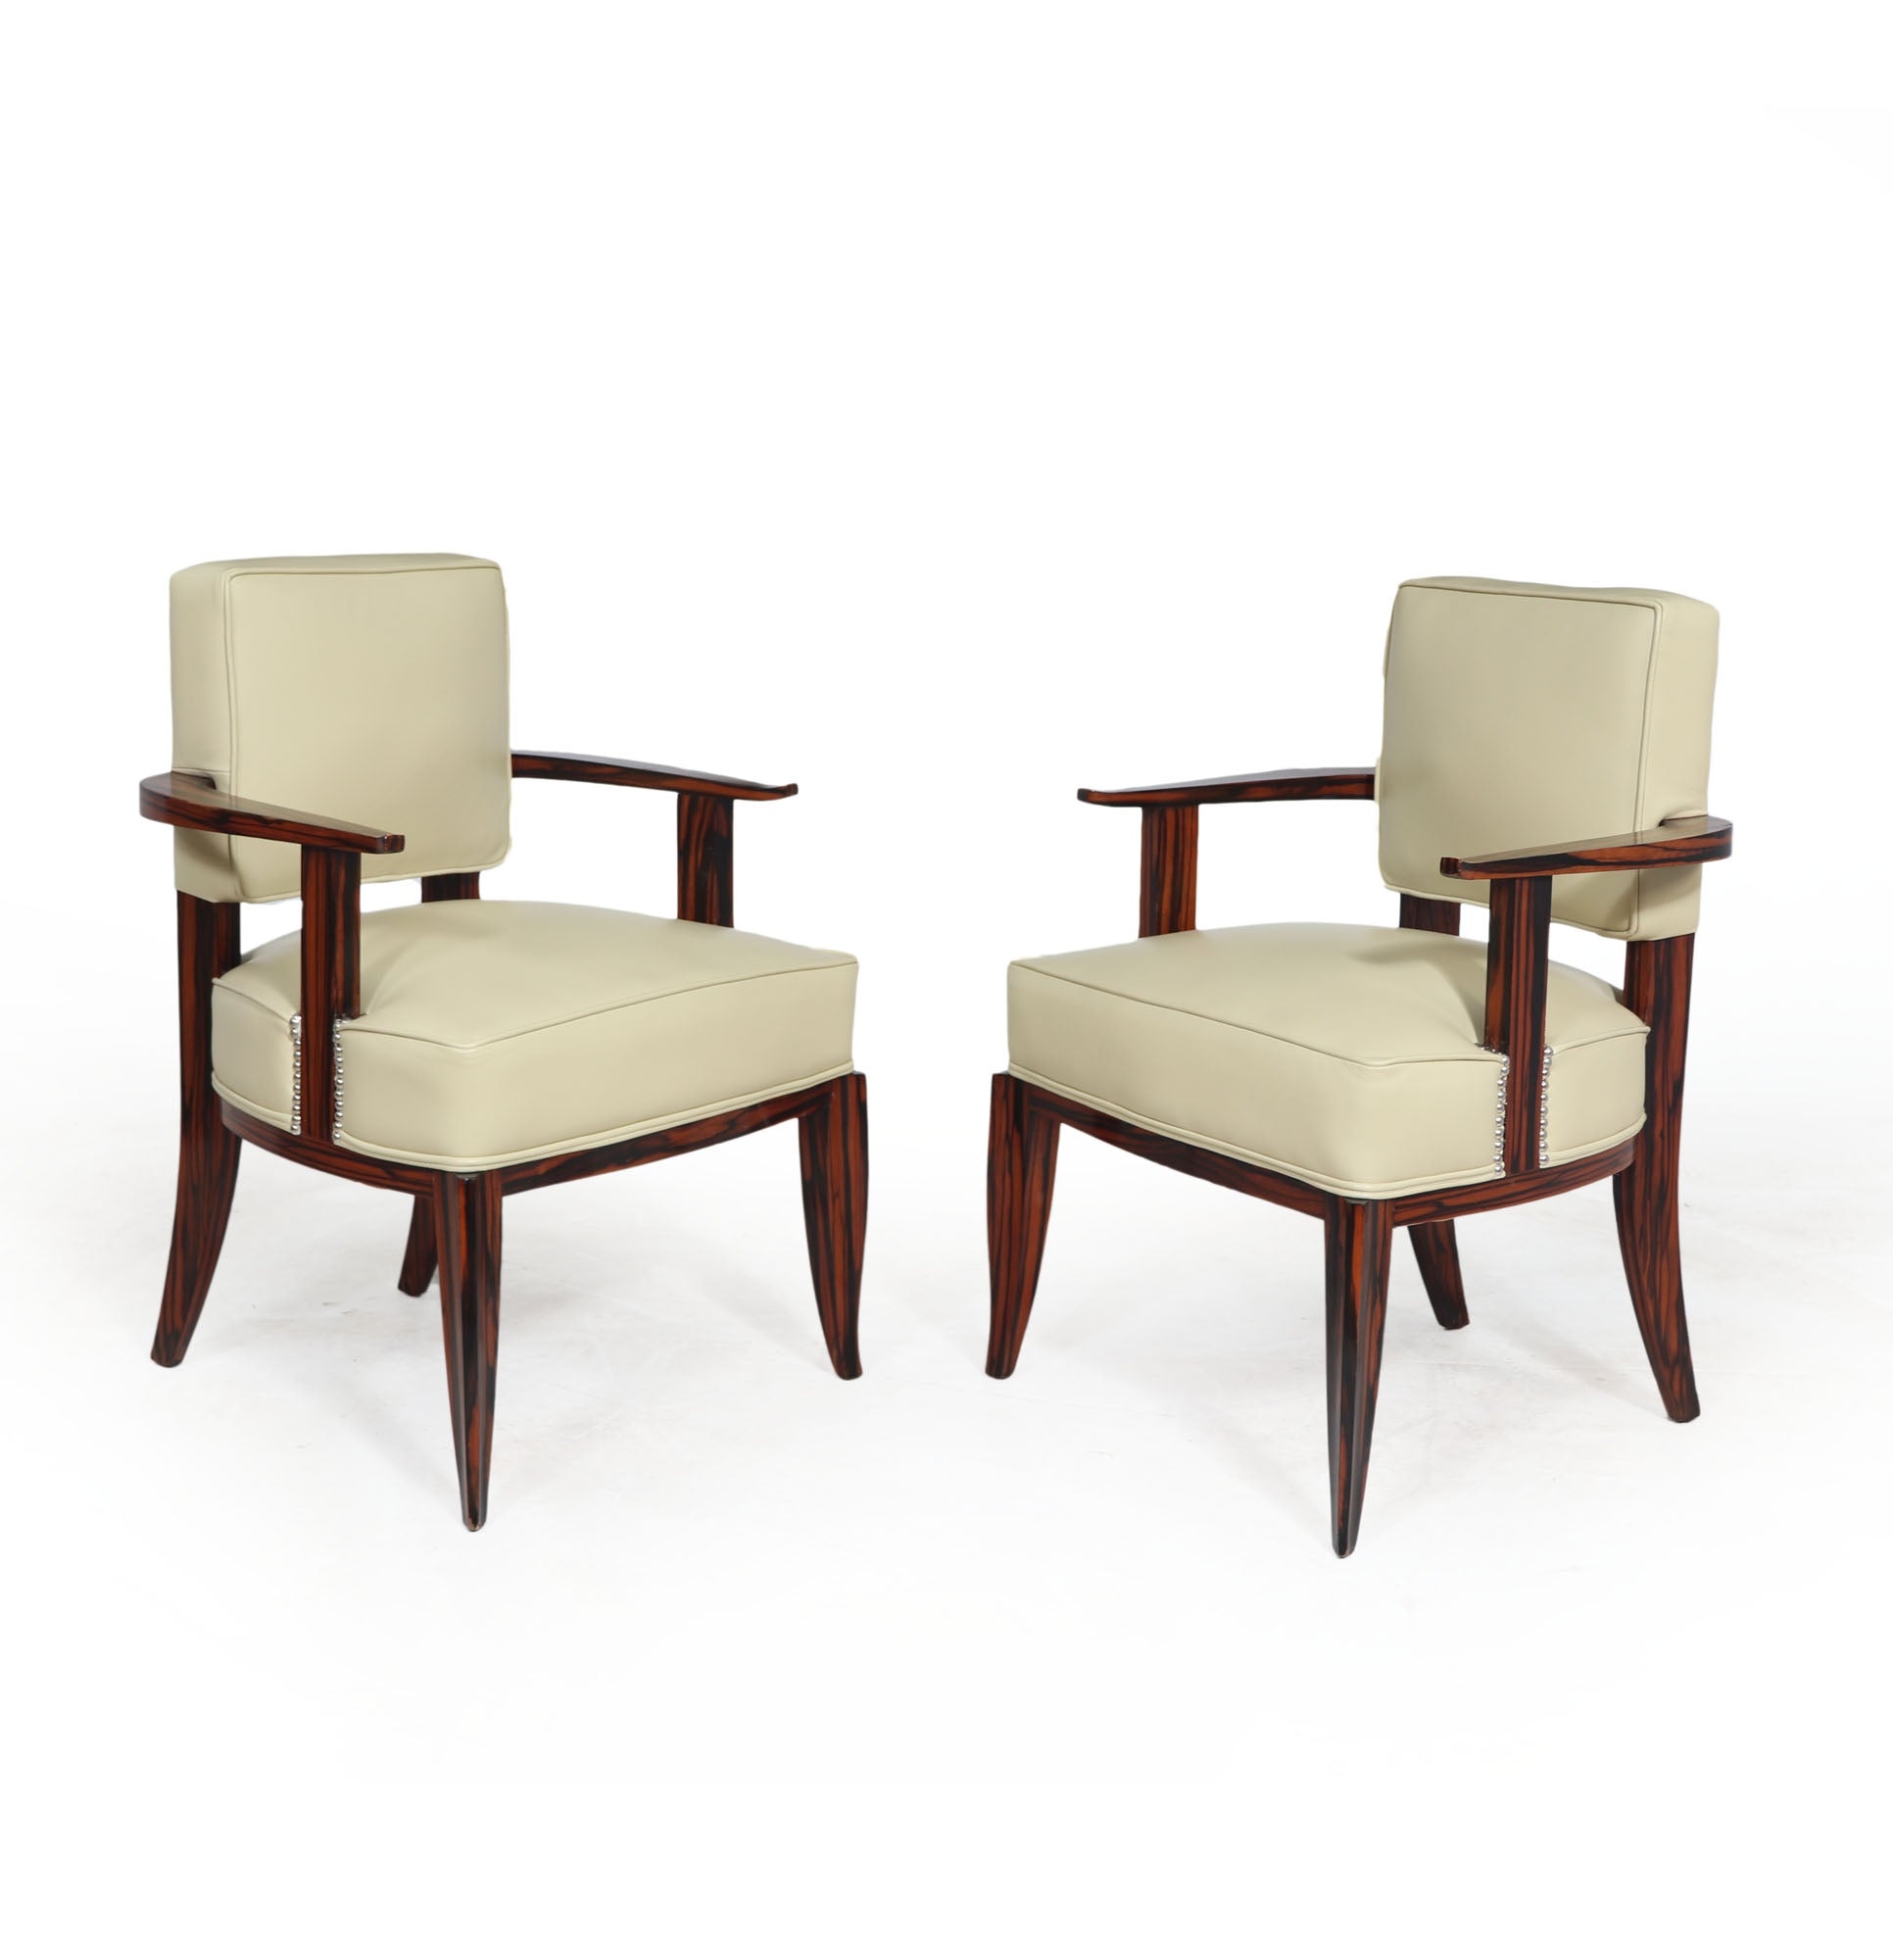 French Art Deco Macassar Ebony Chairs – The Furniture Rooms